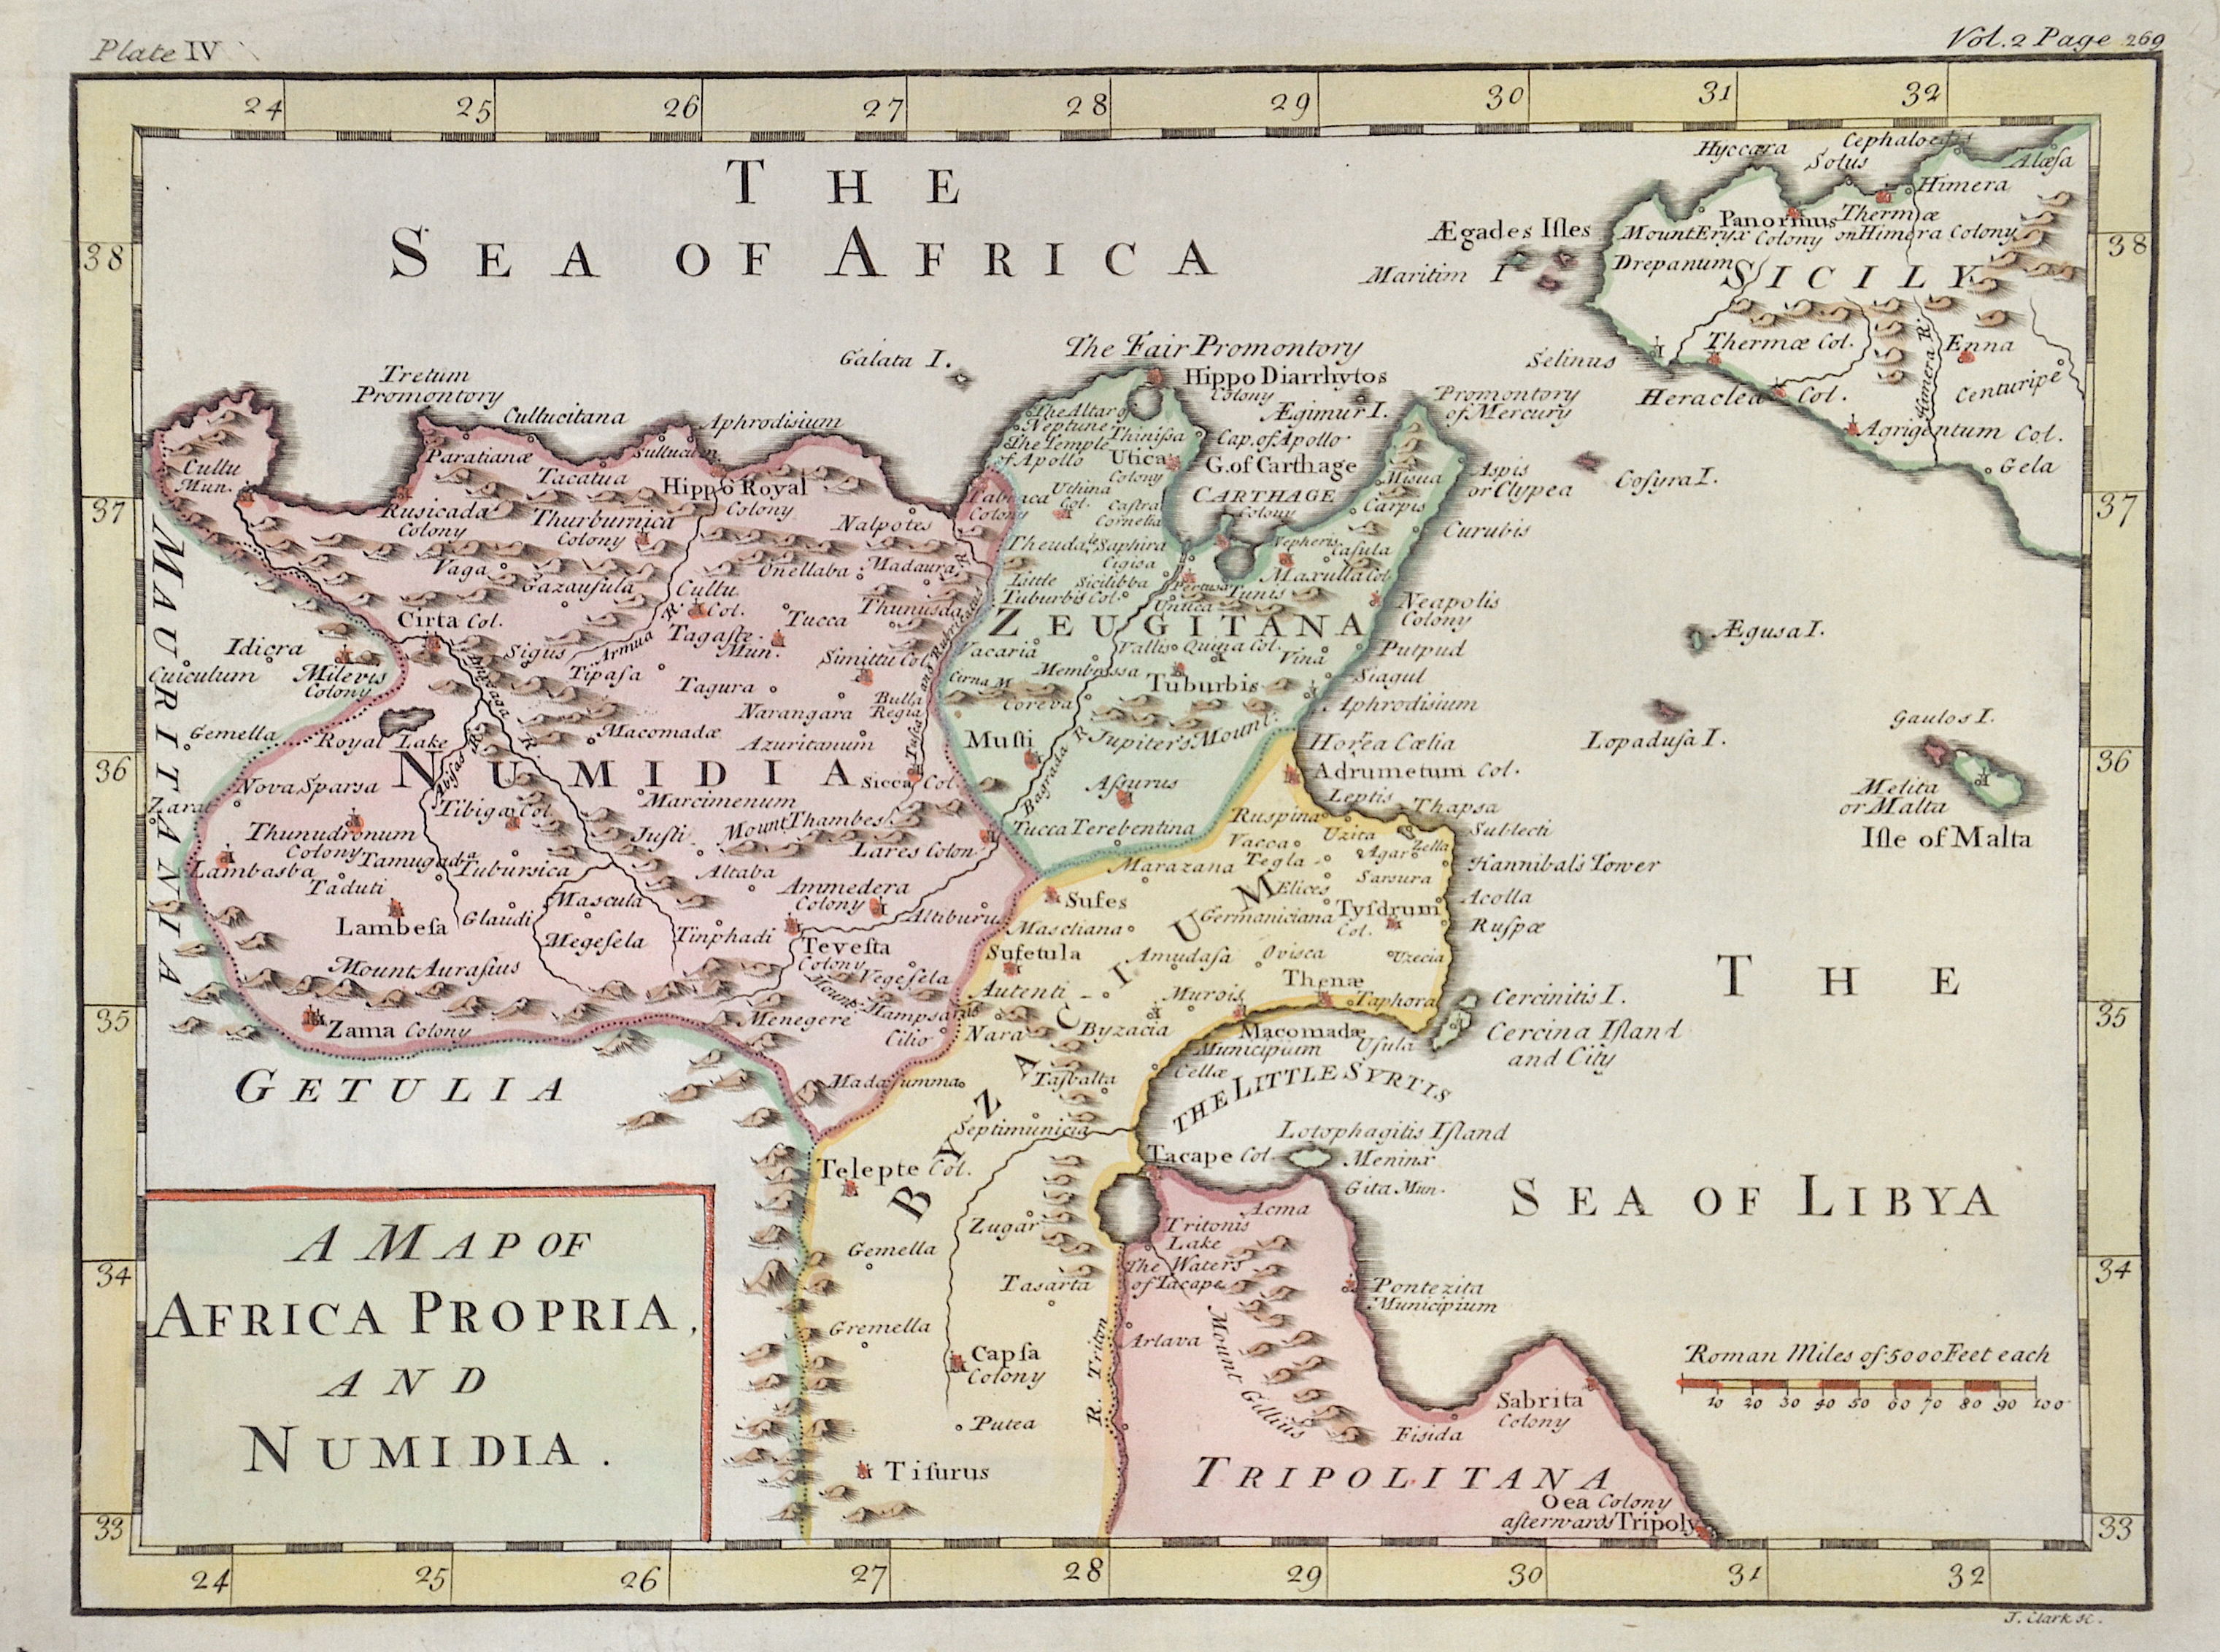 Clark  A Map of Africa Propria, and Numidia.